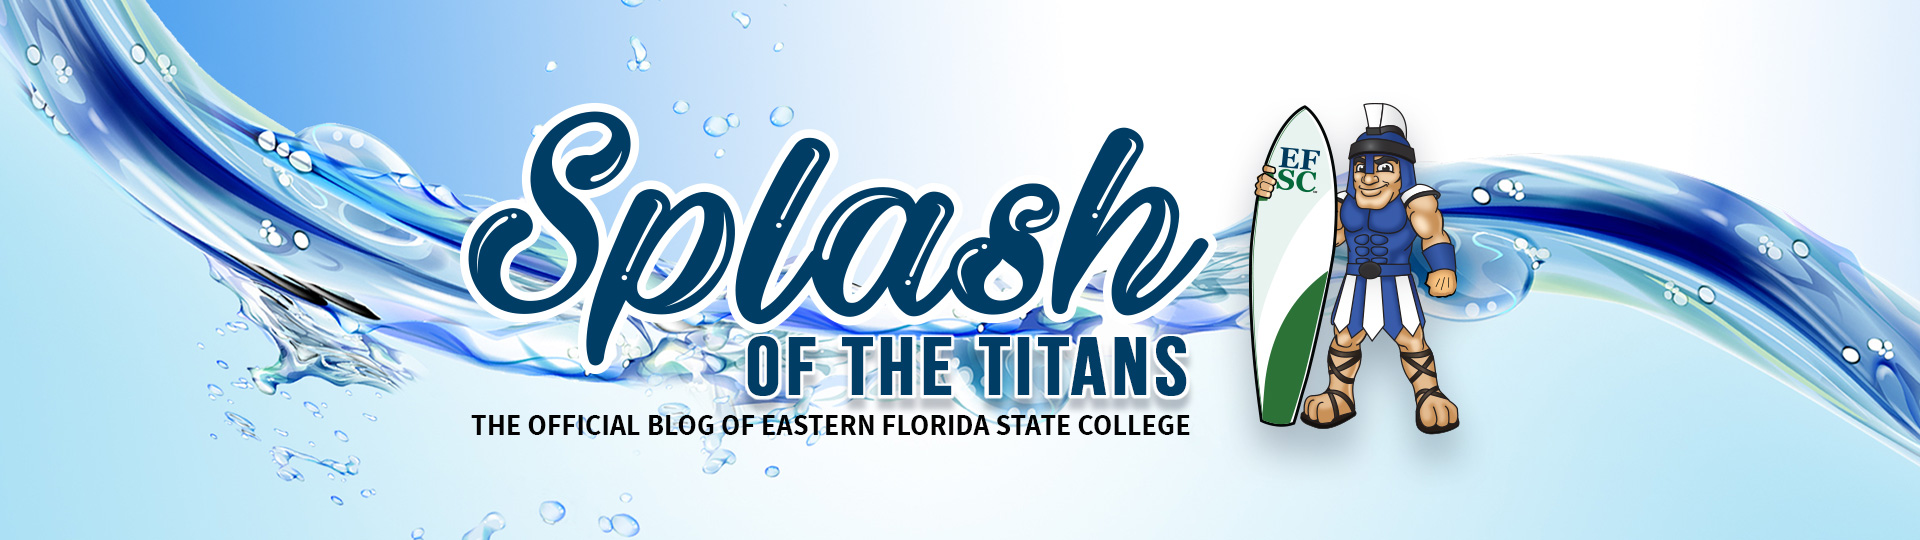 Mr. Titan holding a surfboard with the EFSC logo on it, while standing next to text that reads 'Splash of the Titans: The Official Blog of Eastern Florida State College.'